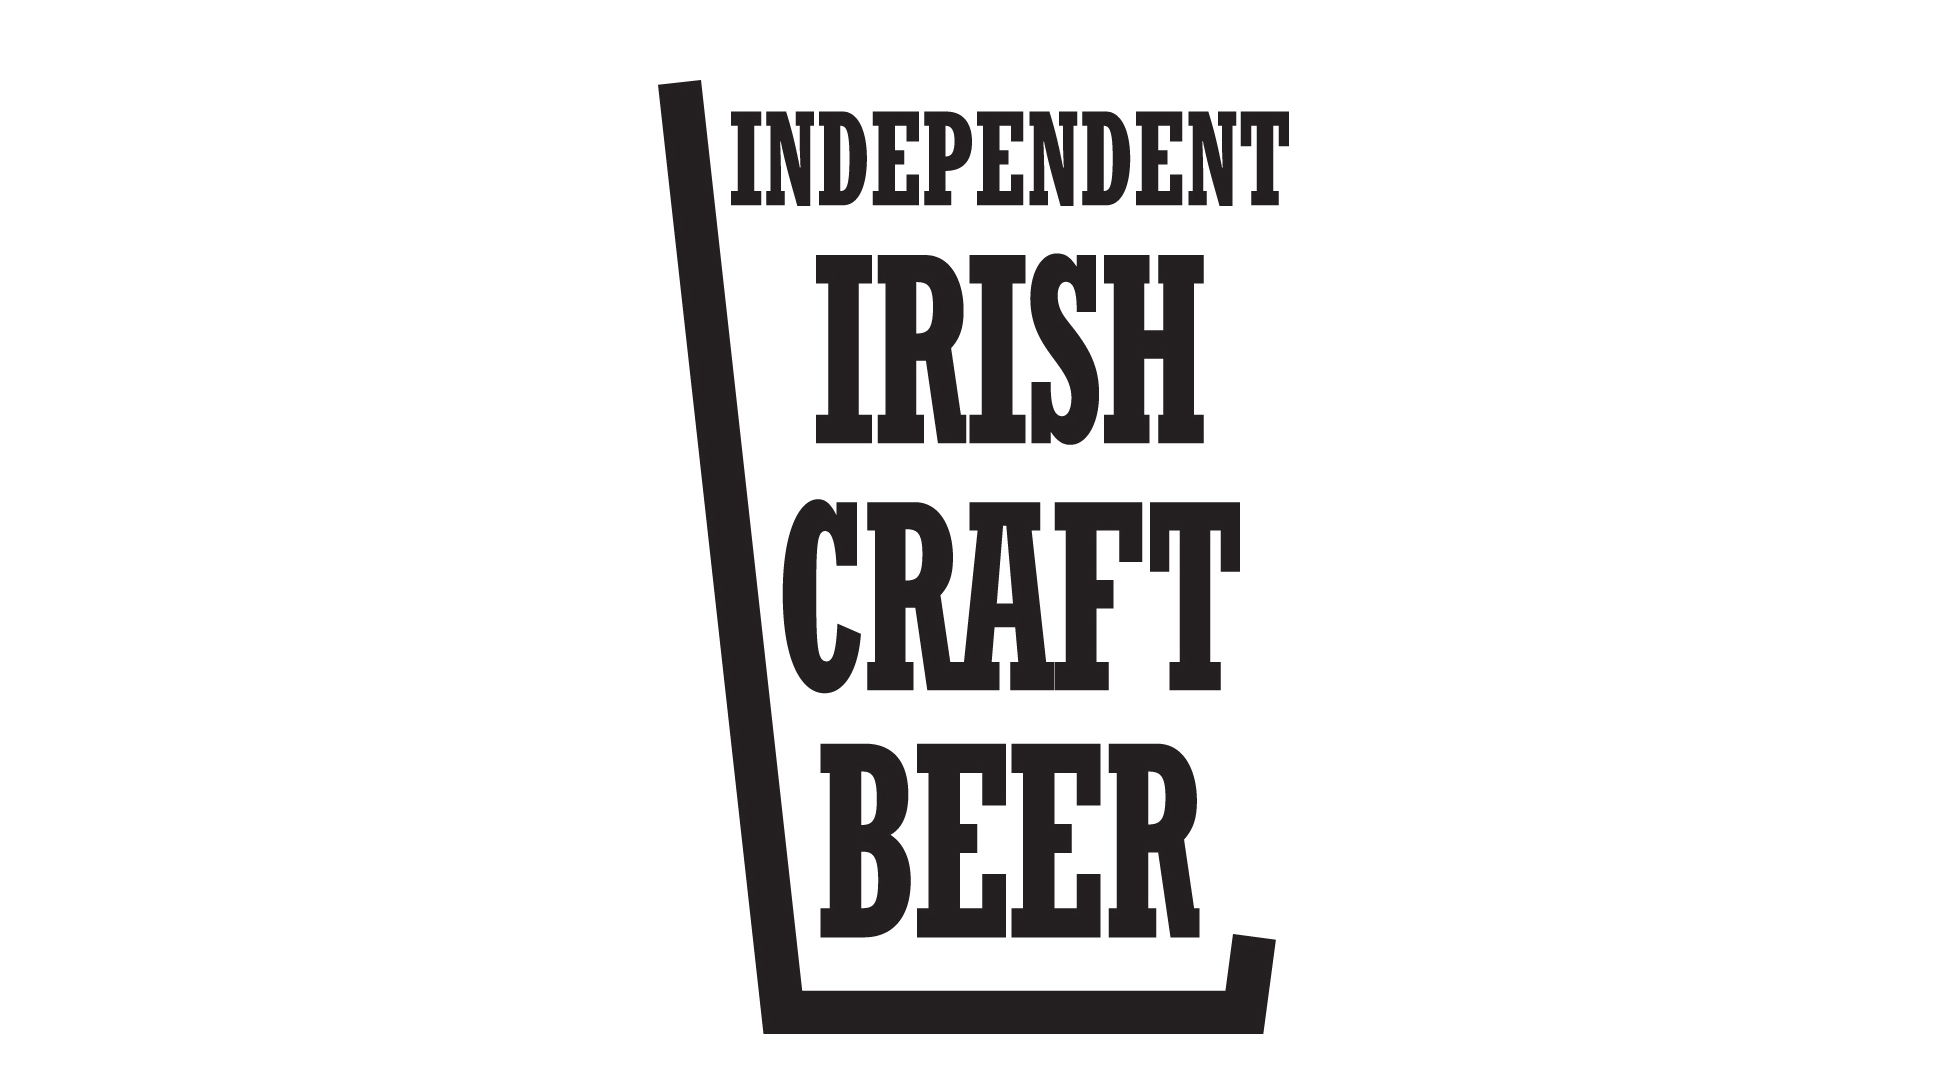 The new symbol means that the consumer can more easily identify a beer from an independent Irish craft brewer.